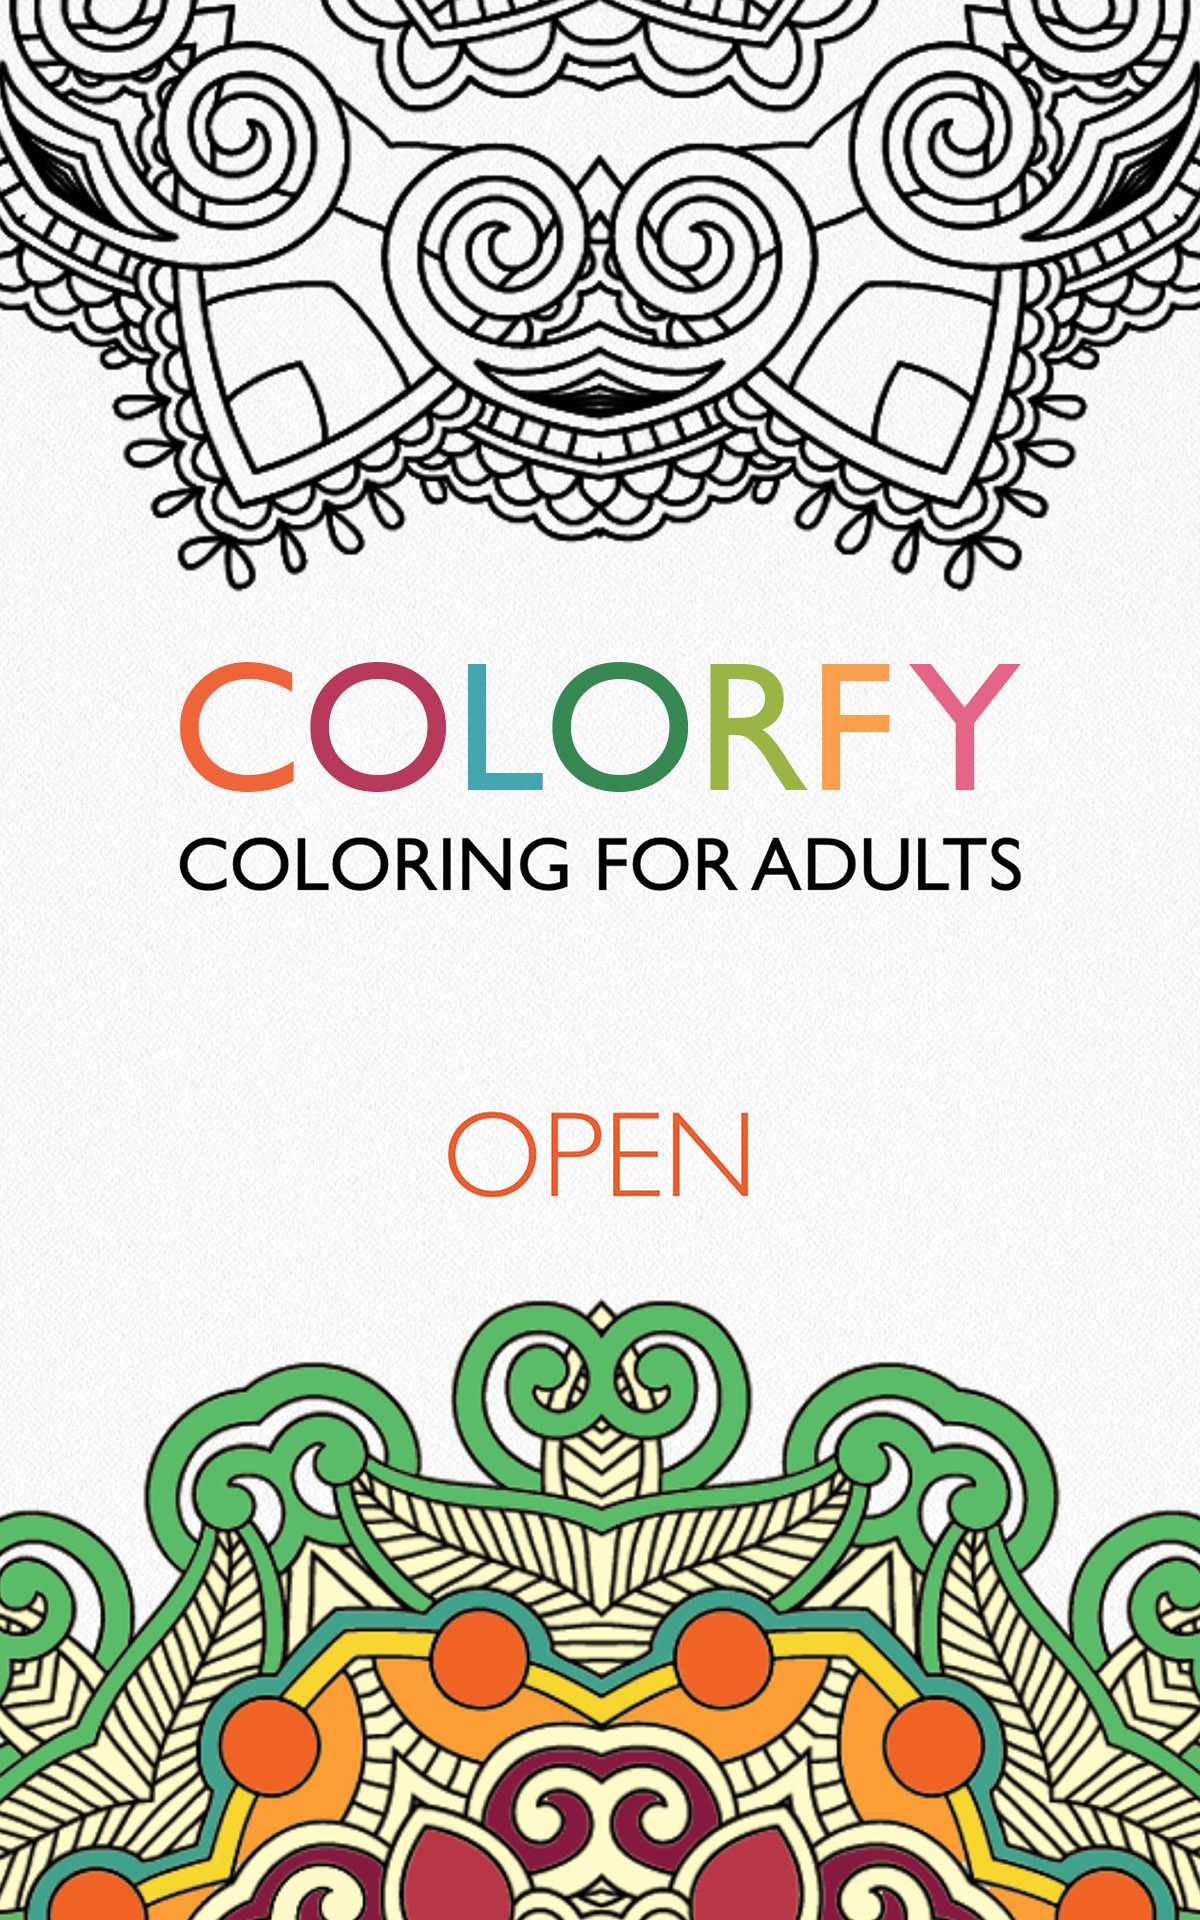 Coloring Books For Adults Apps
 Amazon Colorfy Coloring Book for Adults Free